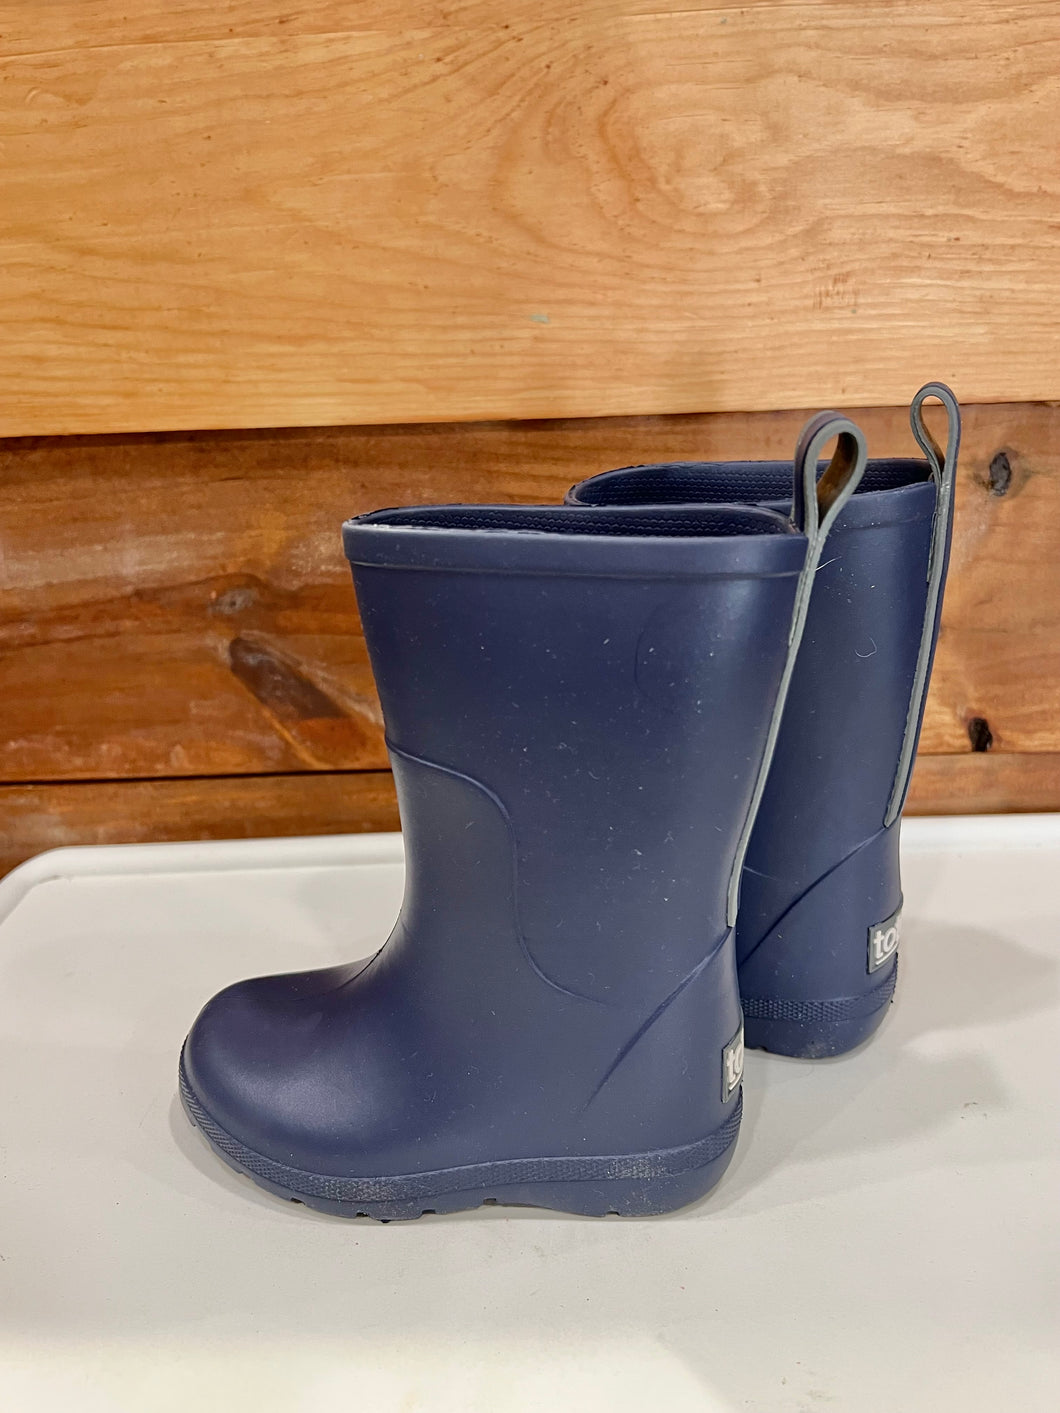 Totes Blue Boots Size 5-6